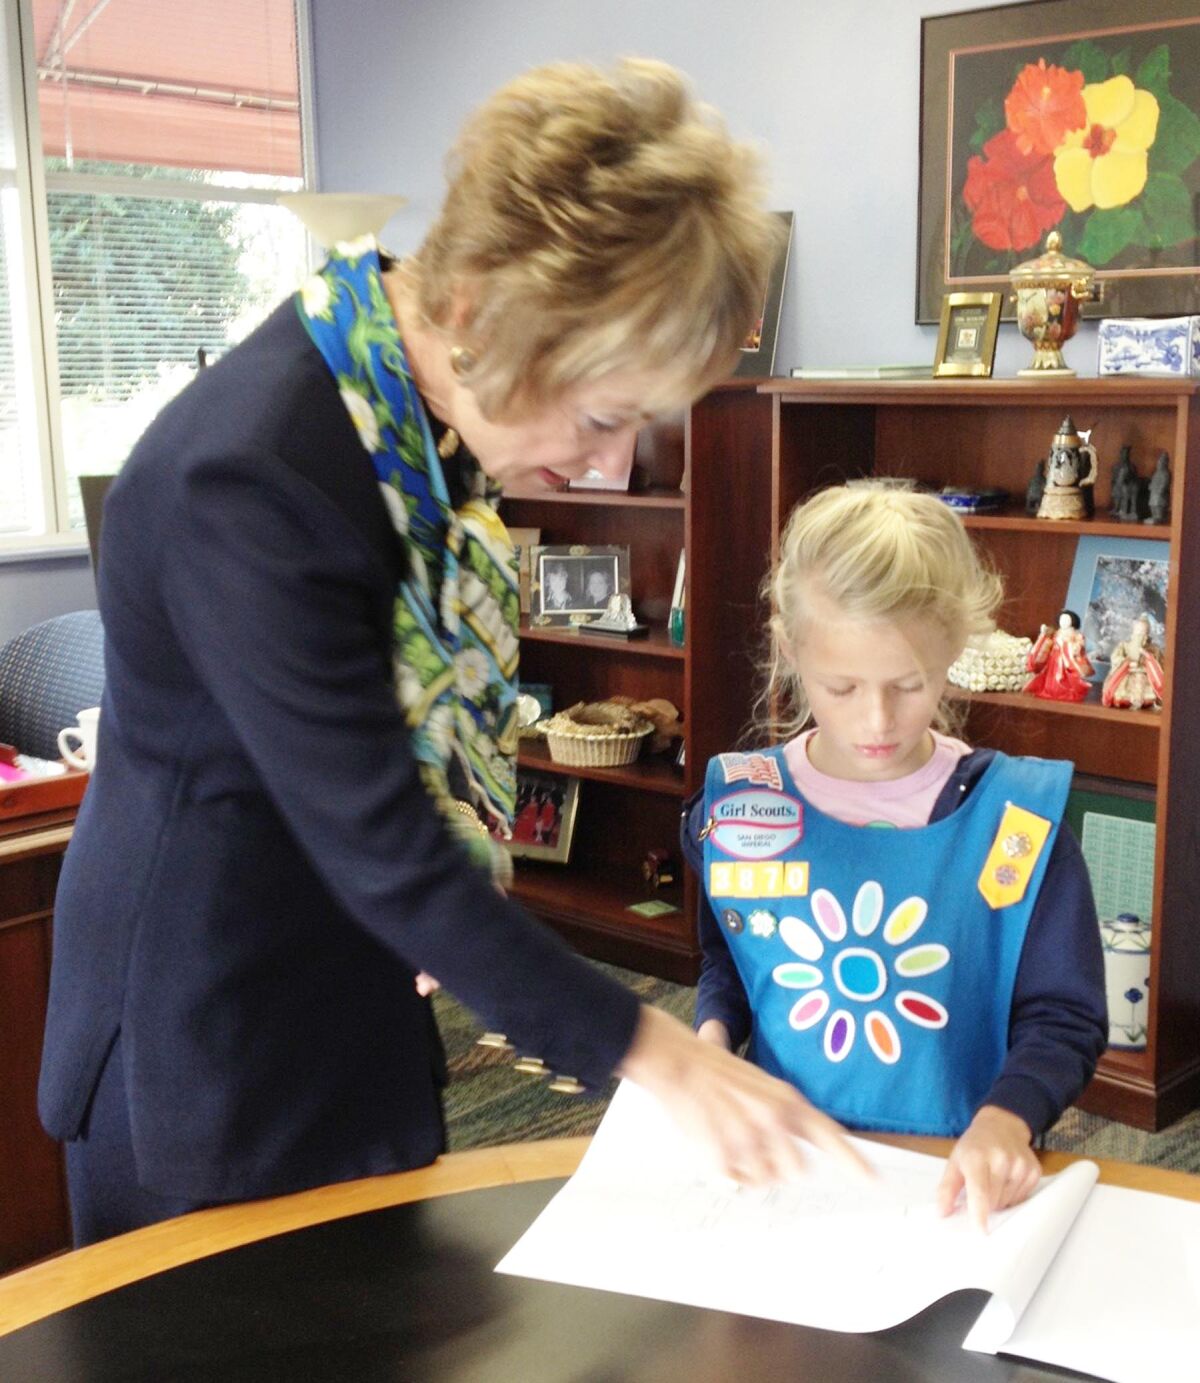 Former Girl Scouts San Diego CEO Jo Dee Jacob talking about a project with then-Daisy Girl Scout Daphne Jones.